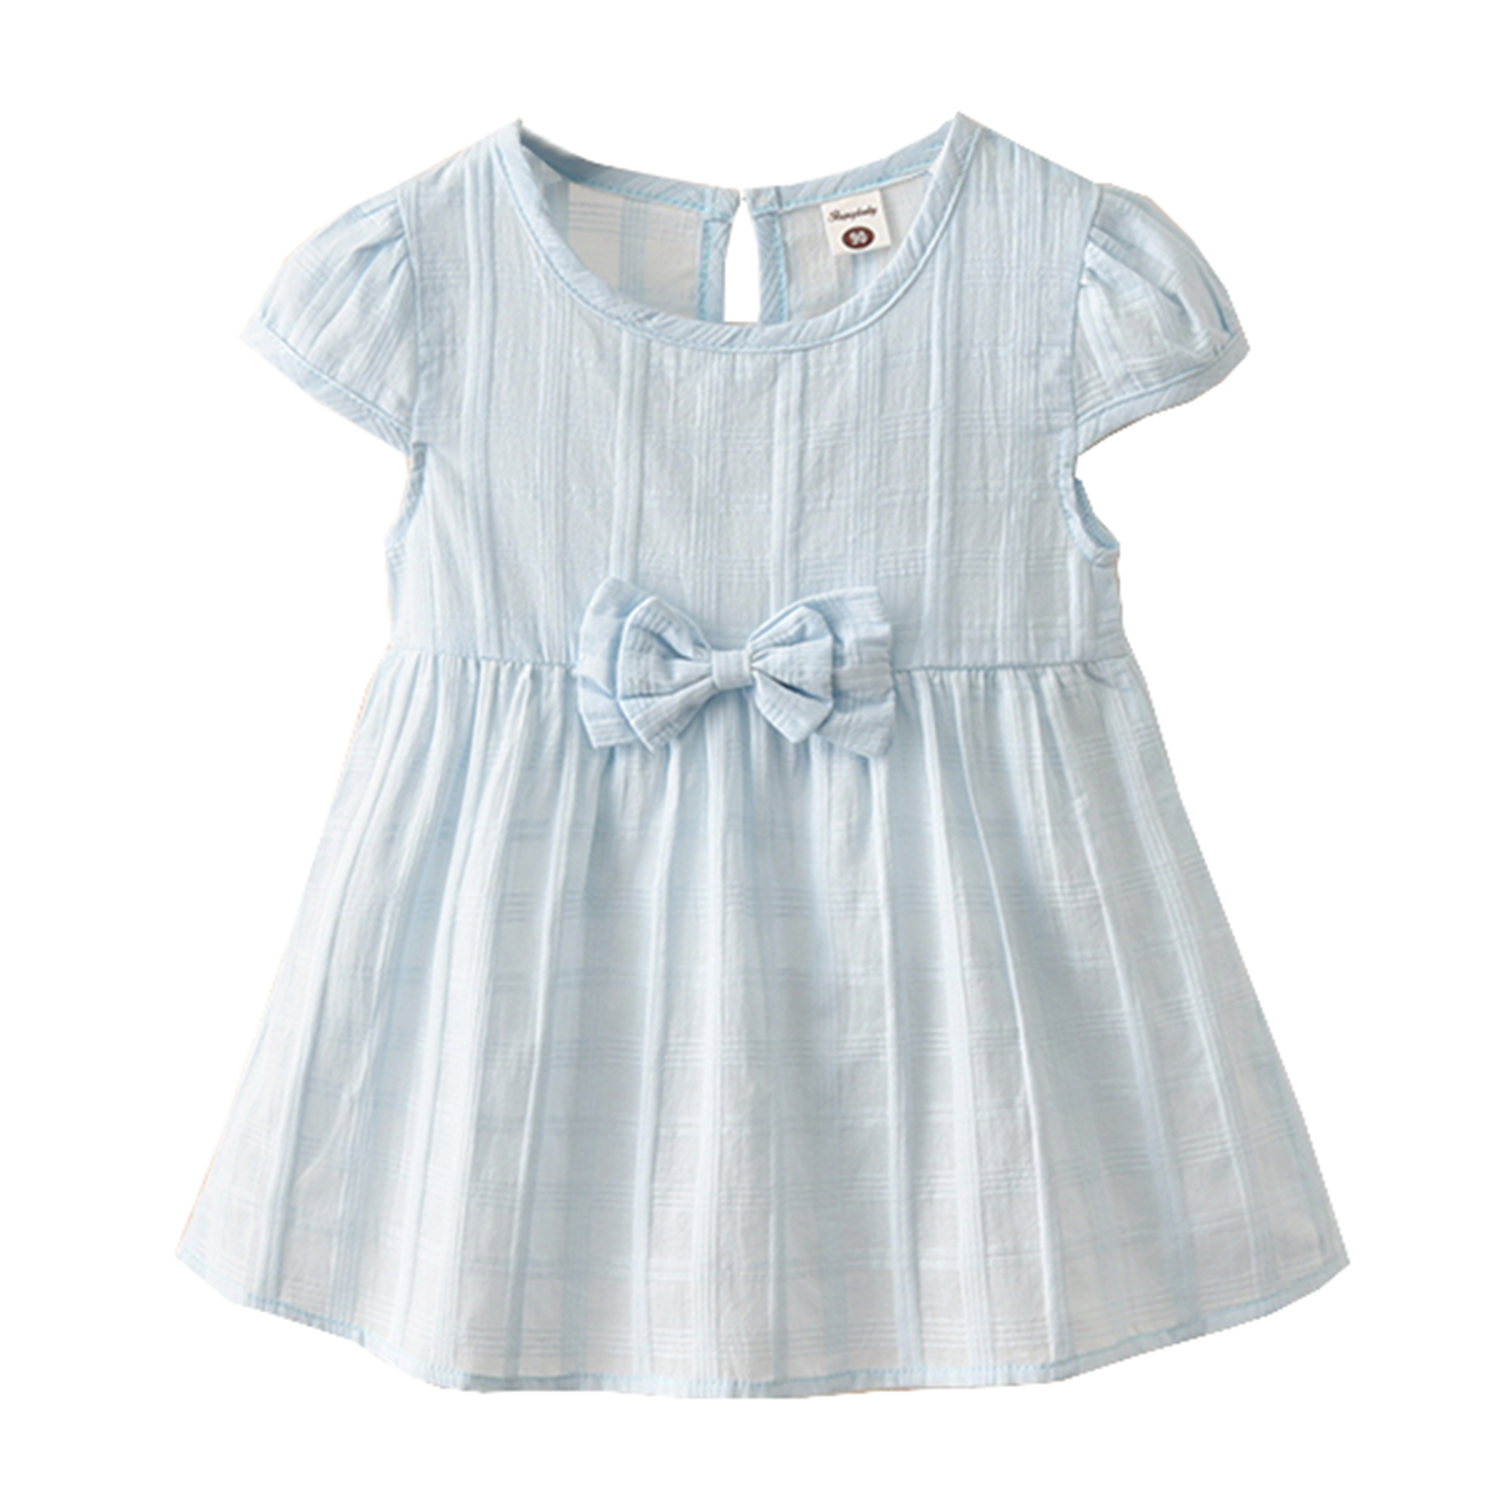 Styles I Love Baby Toddler Girl Solid Color Cap-Sleeve Bowknot Cotton Dress Spring Summer Clothes 3 Colors (Blue, 120/3-4 Years) - image 2 of 5